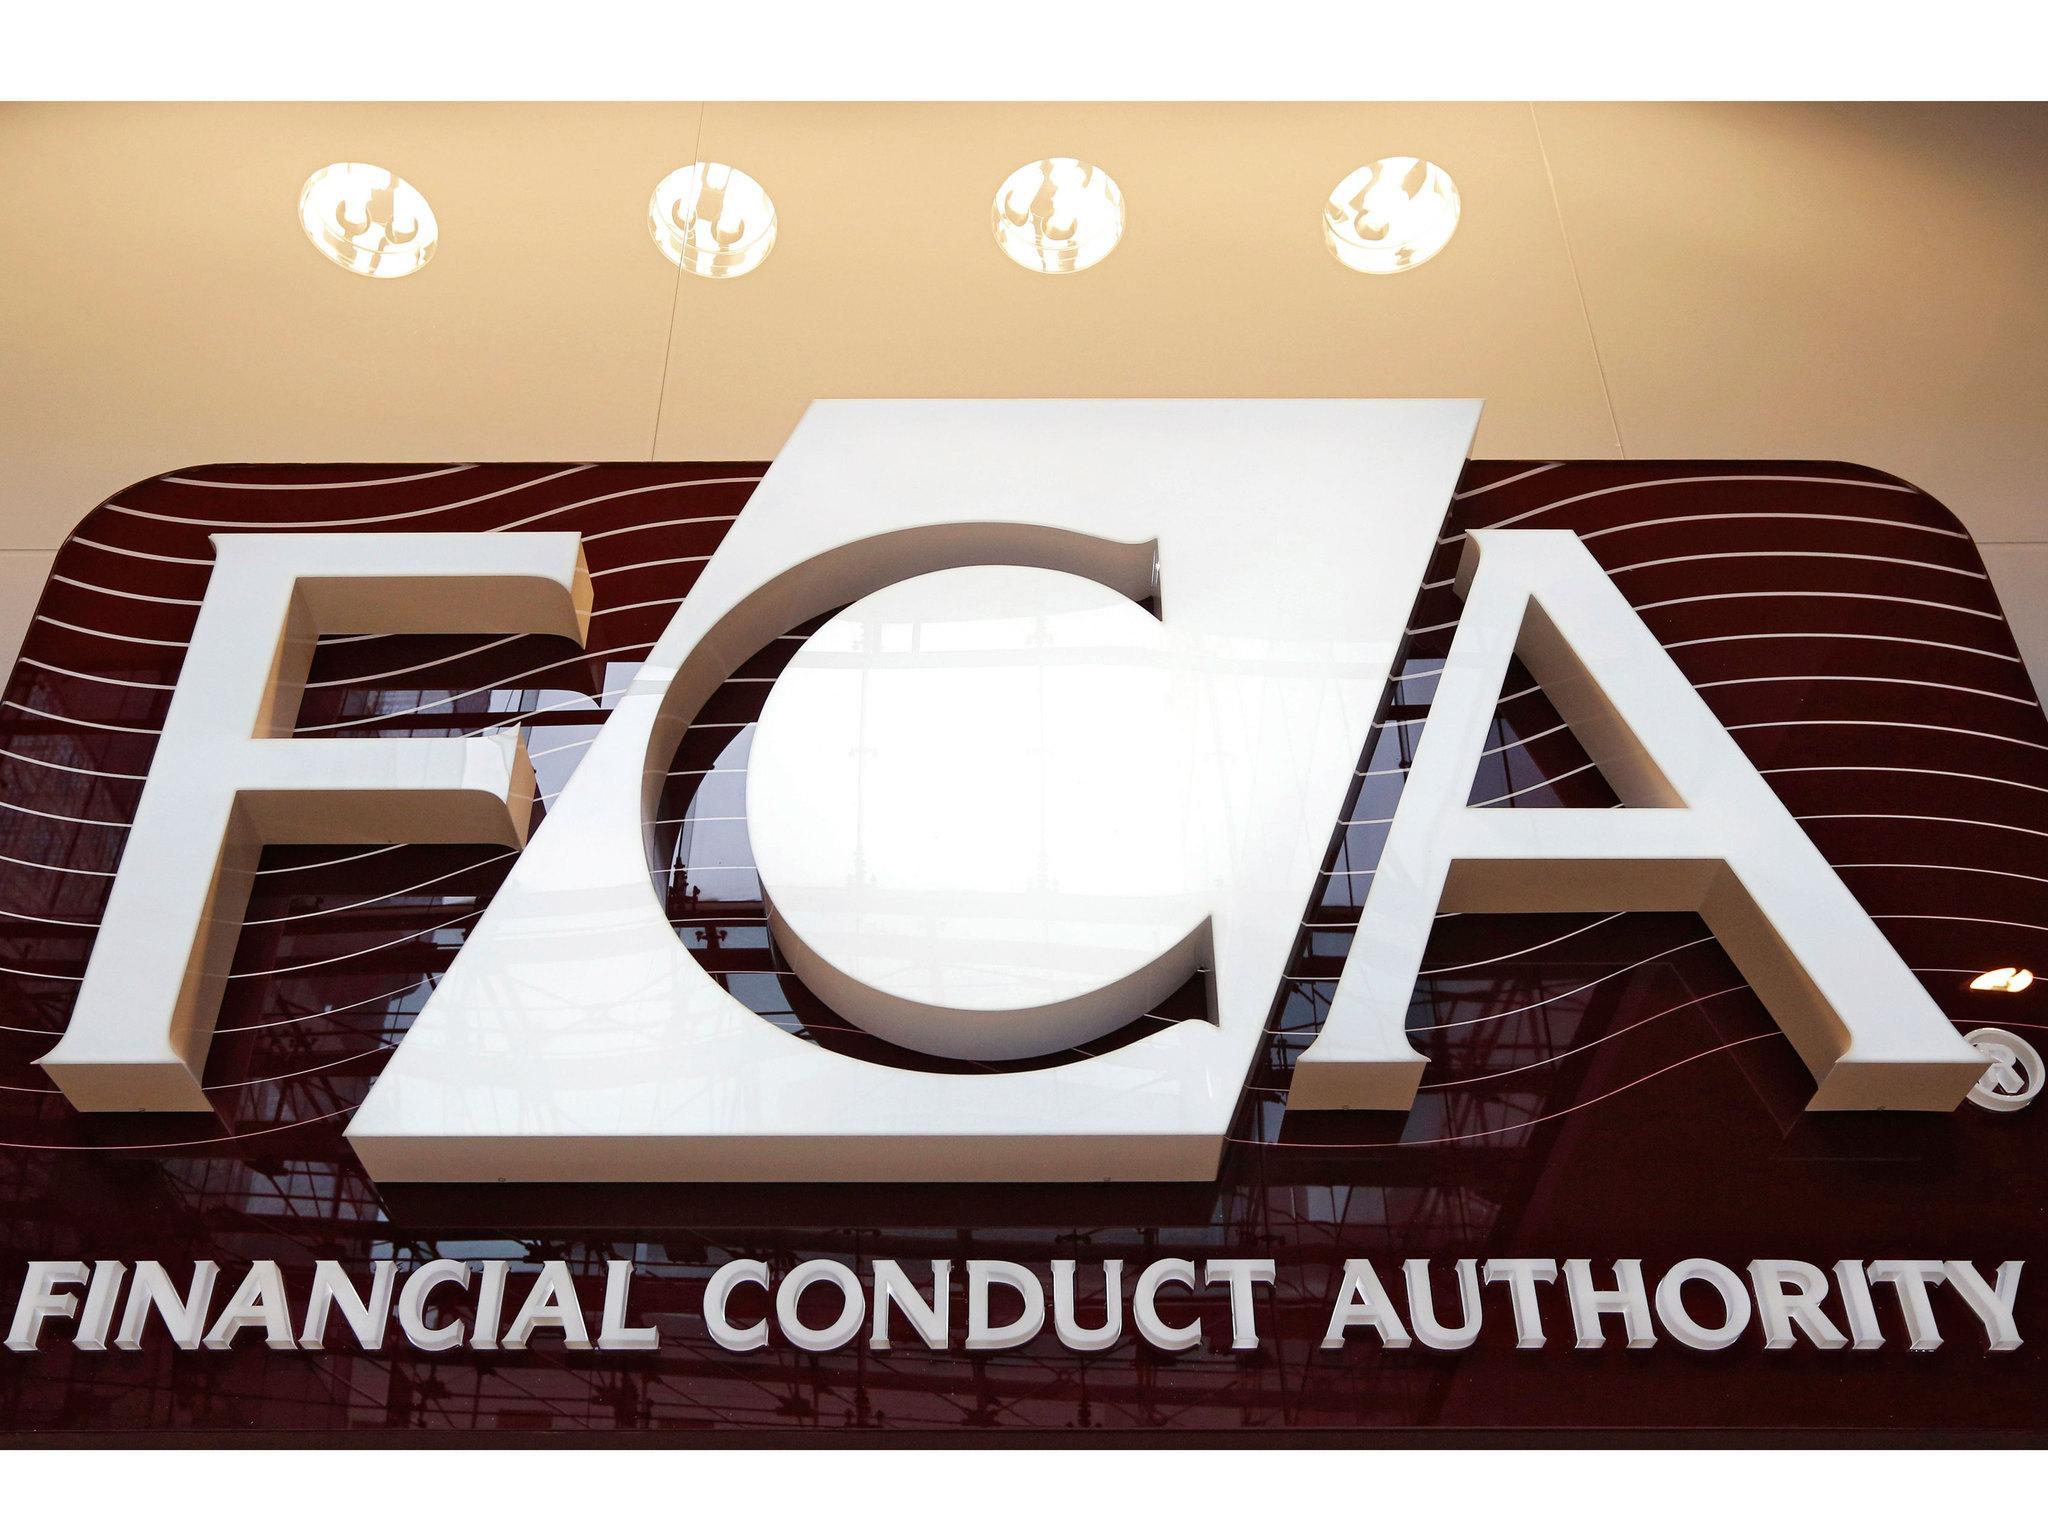 FCA is proposing a crackdown on spread betting